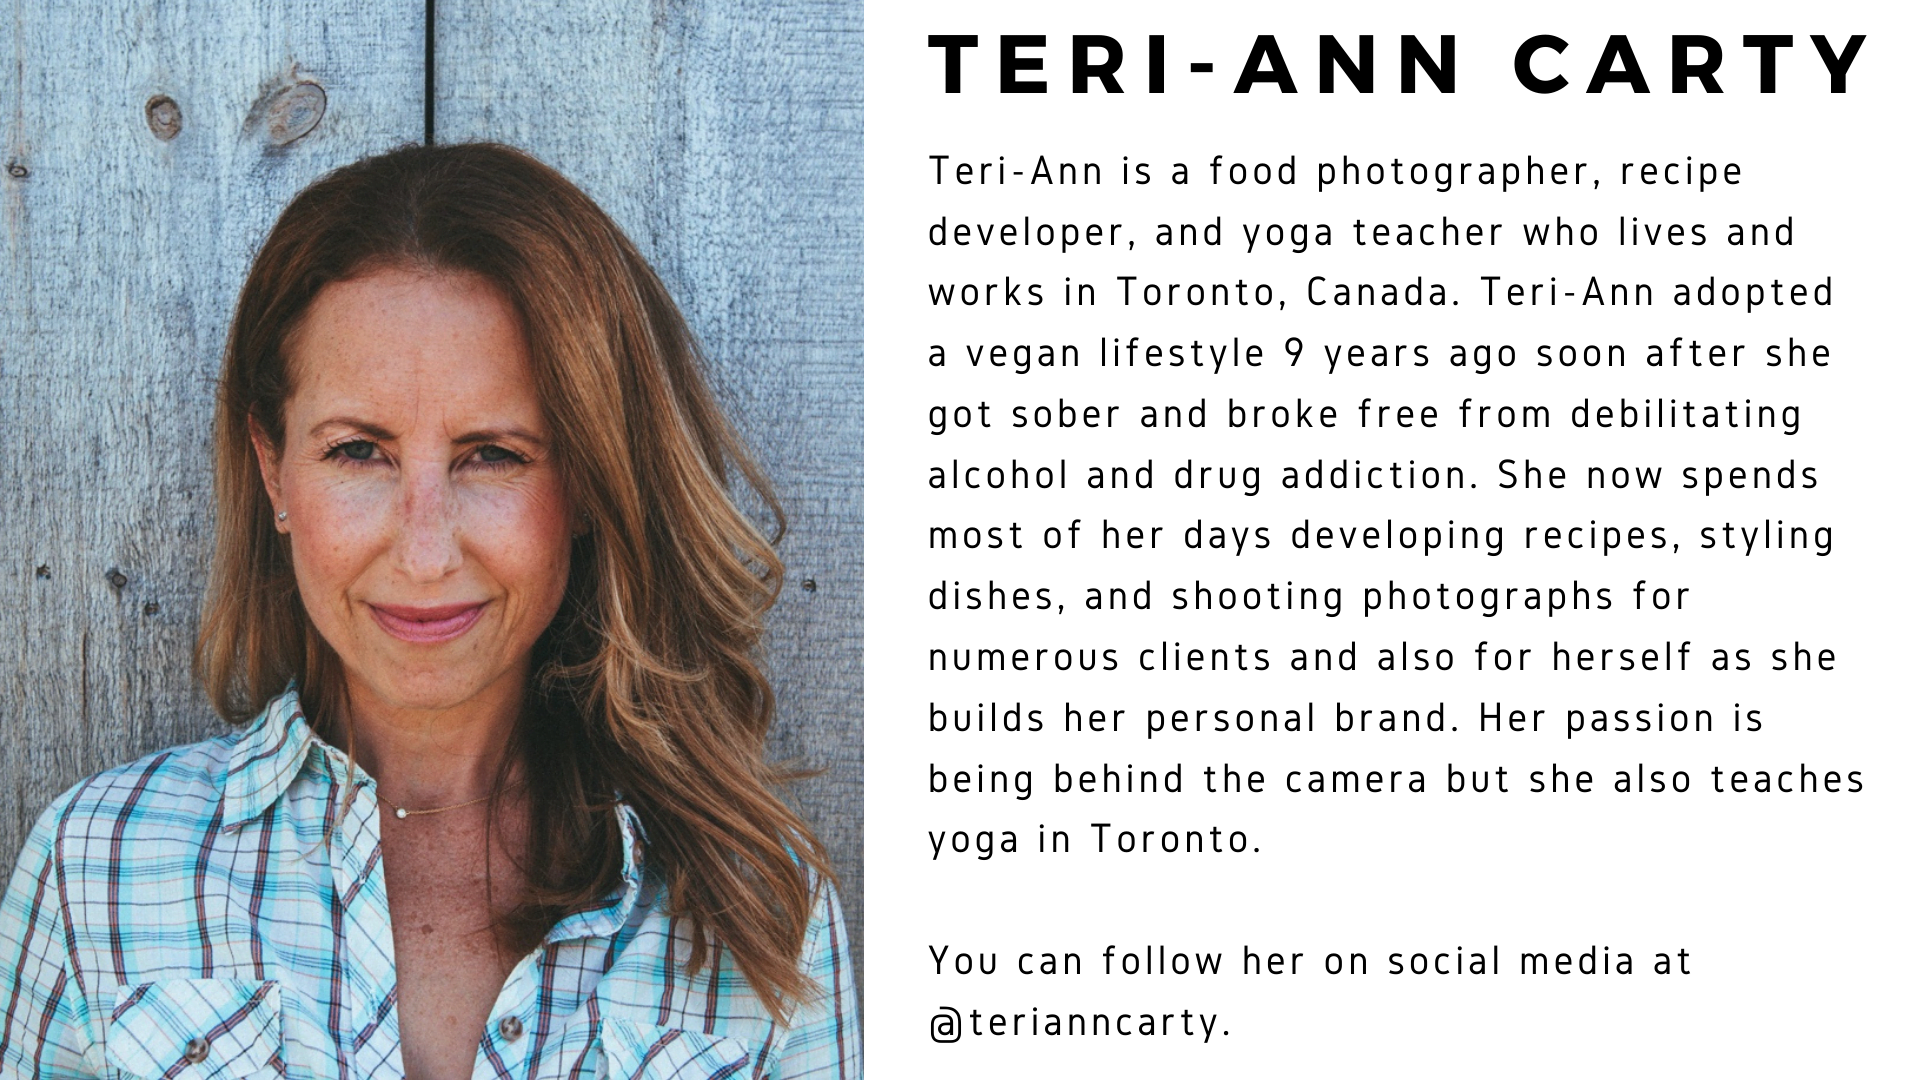 A picture of Teri-Ann Carty next to her bio, which reads: Teri-Ann is a food photographer, recipe developer, and yoga teacher who lives and works in Toronto, Canada. Teri-Ann adopted a vegan lifestyle 9 years ago soon after she got sober and broke free from debilitating alcohol and drug addiction. She now spends most of her days developing recipes, styling dishes, and shooting photographs for numerous clients and also for herself as she builds her personal brand. Her passion is being behind the camera but she also teaches yoga in Toronto. You can follow her on social media at @terianncarty.